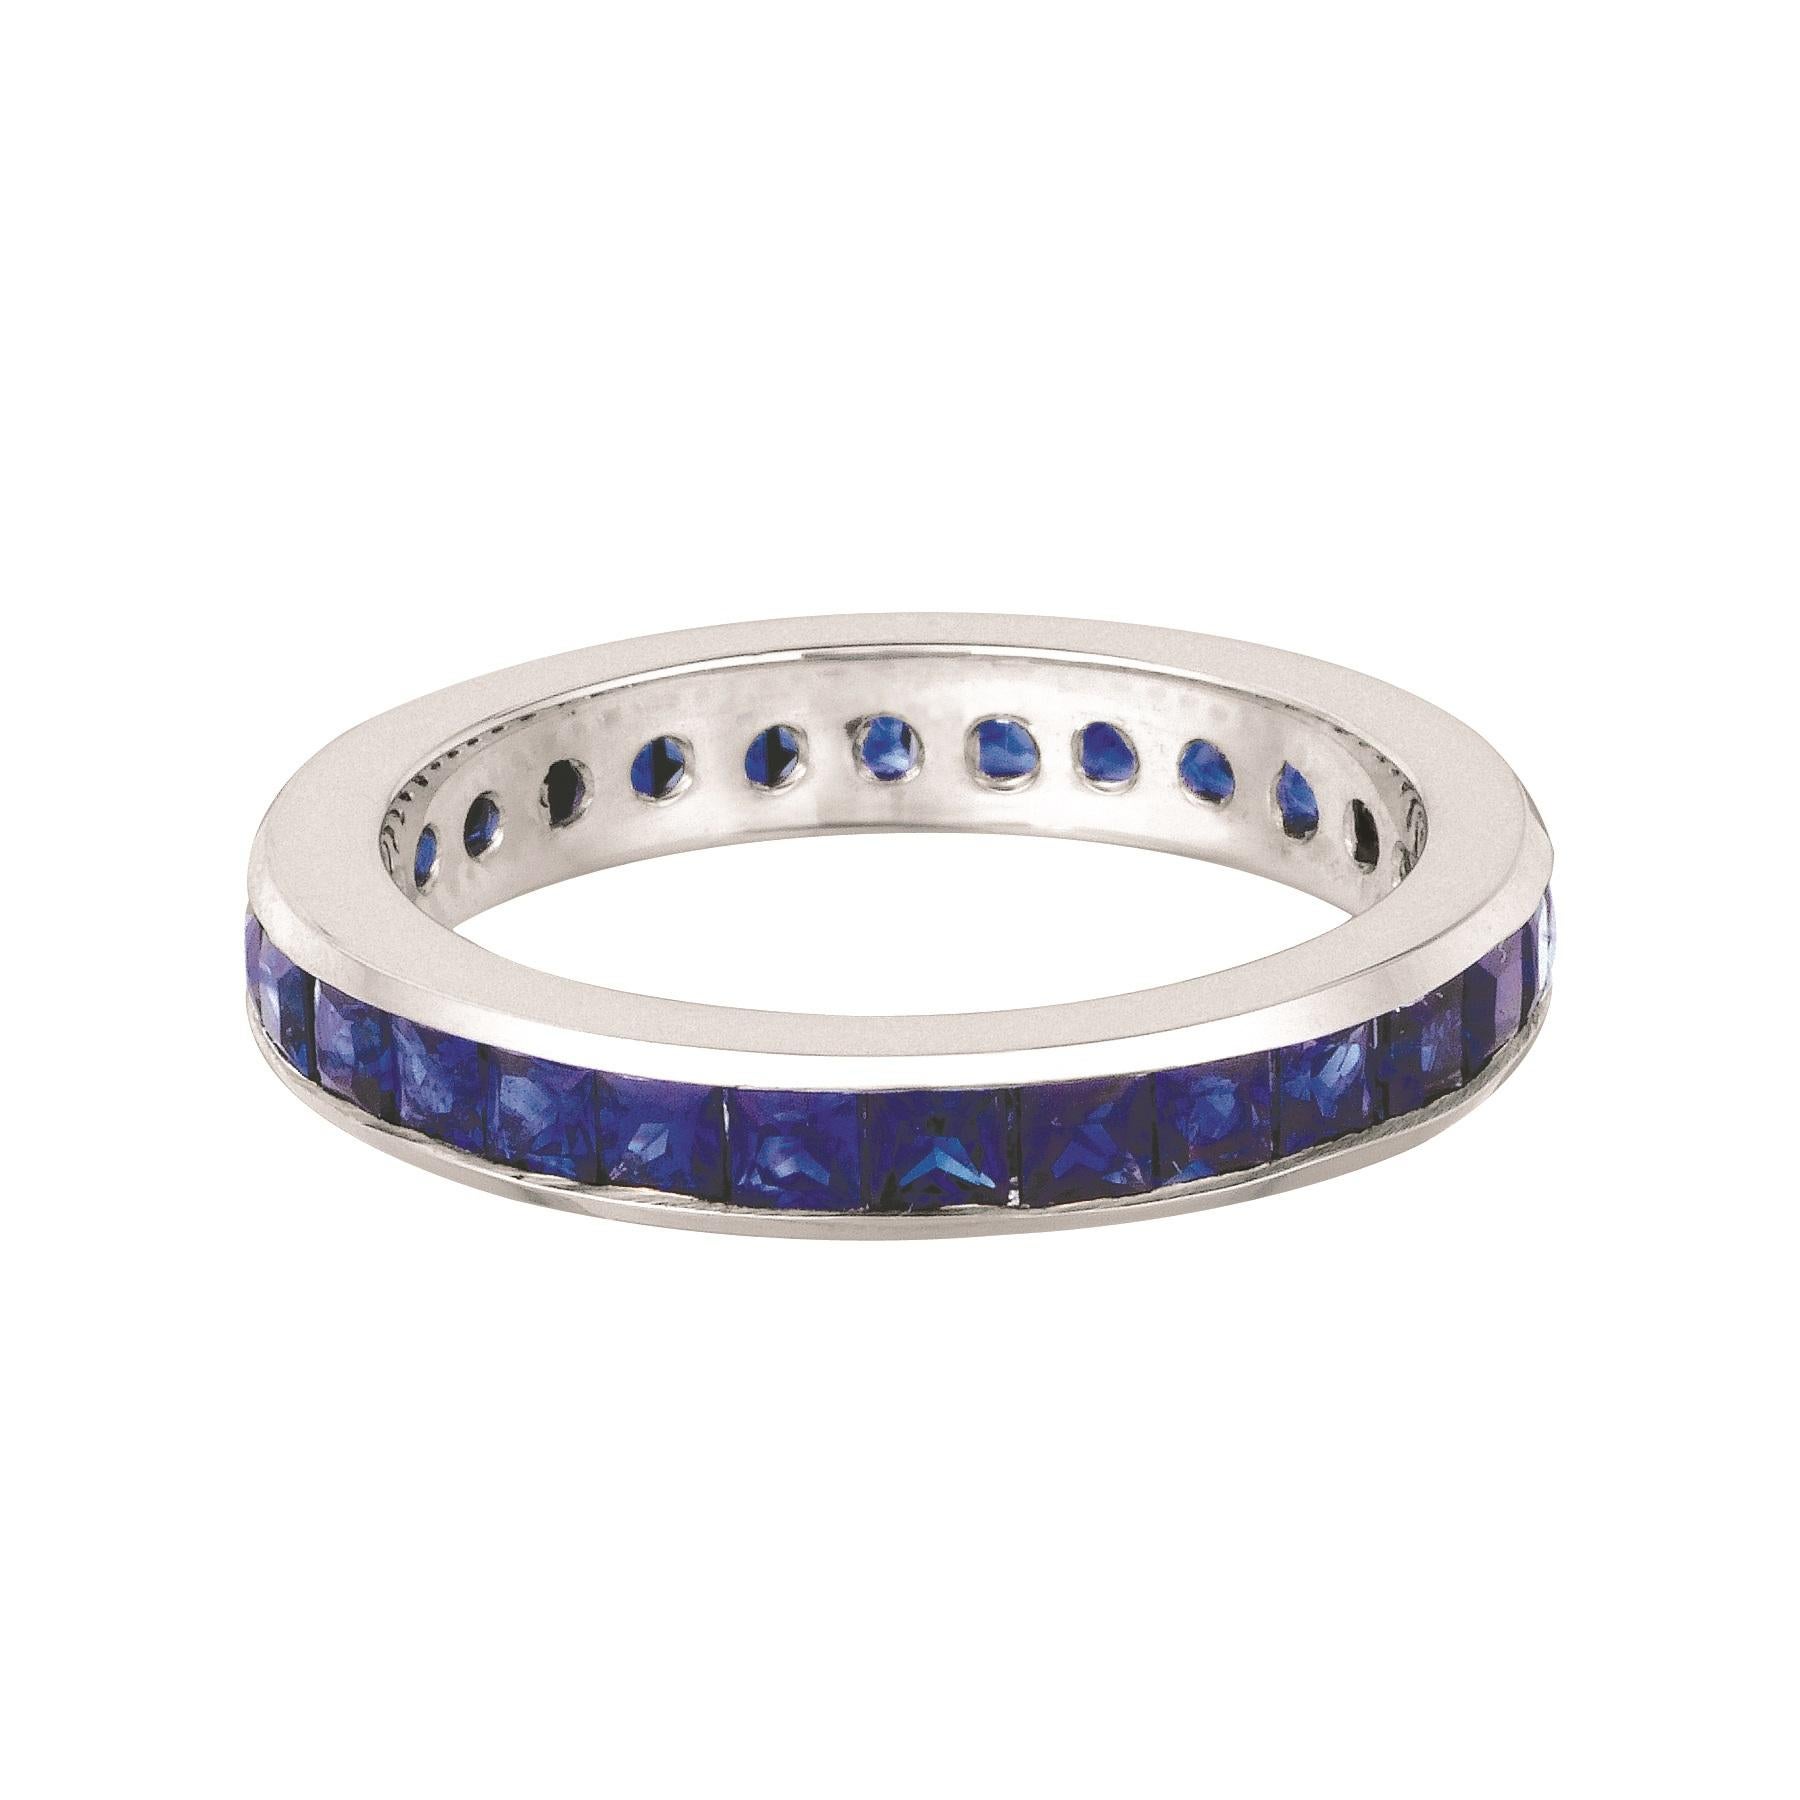 2.70 Carat Natural Sapphire Eternity Ring G SI 14K White Gold

100% Natural Sapphires
3.05CTW
Blue
SI
14K White Gold Channel style, 4.8 grams
3 mm in width
Size 7
27 stones

R5959WS

ALL OUR ITEMS ARE AVAILABLE TO BE ORDERED IN 14K WHITE, ROSE OR